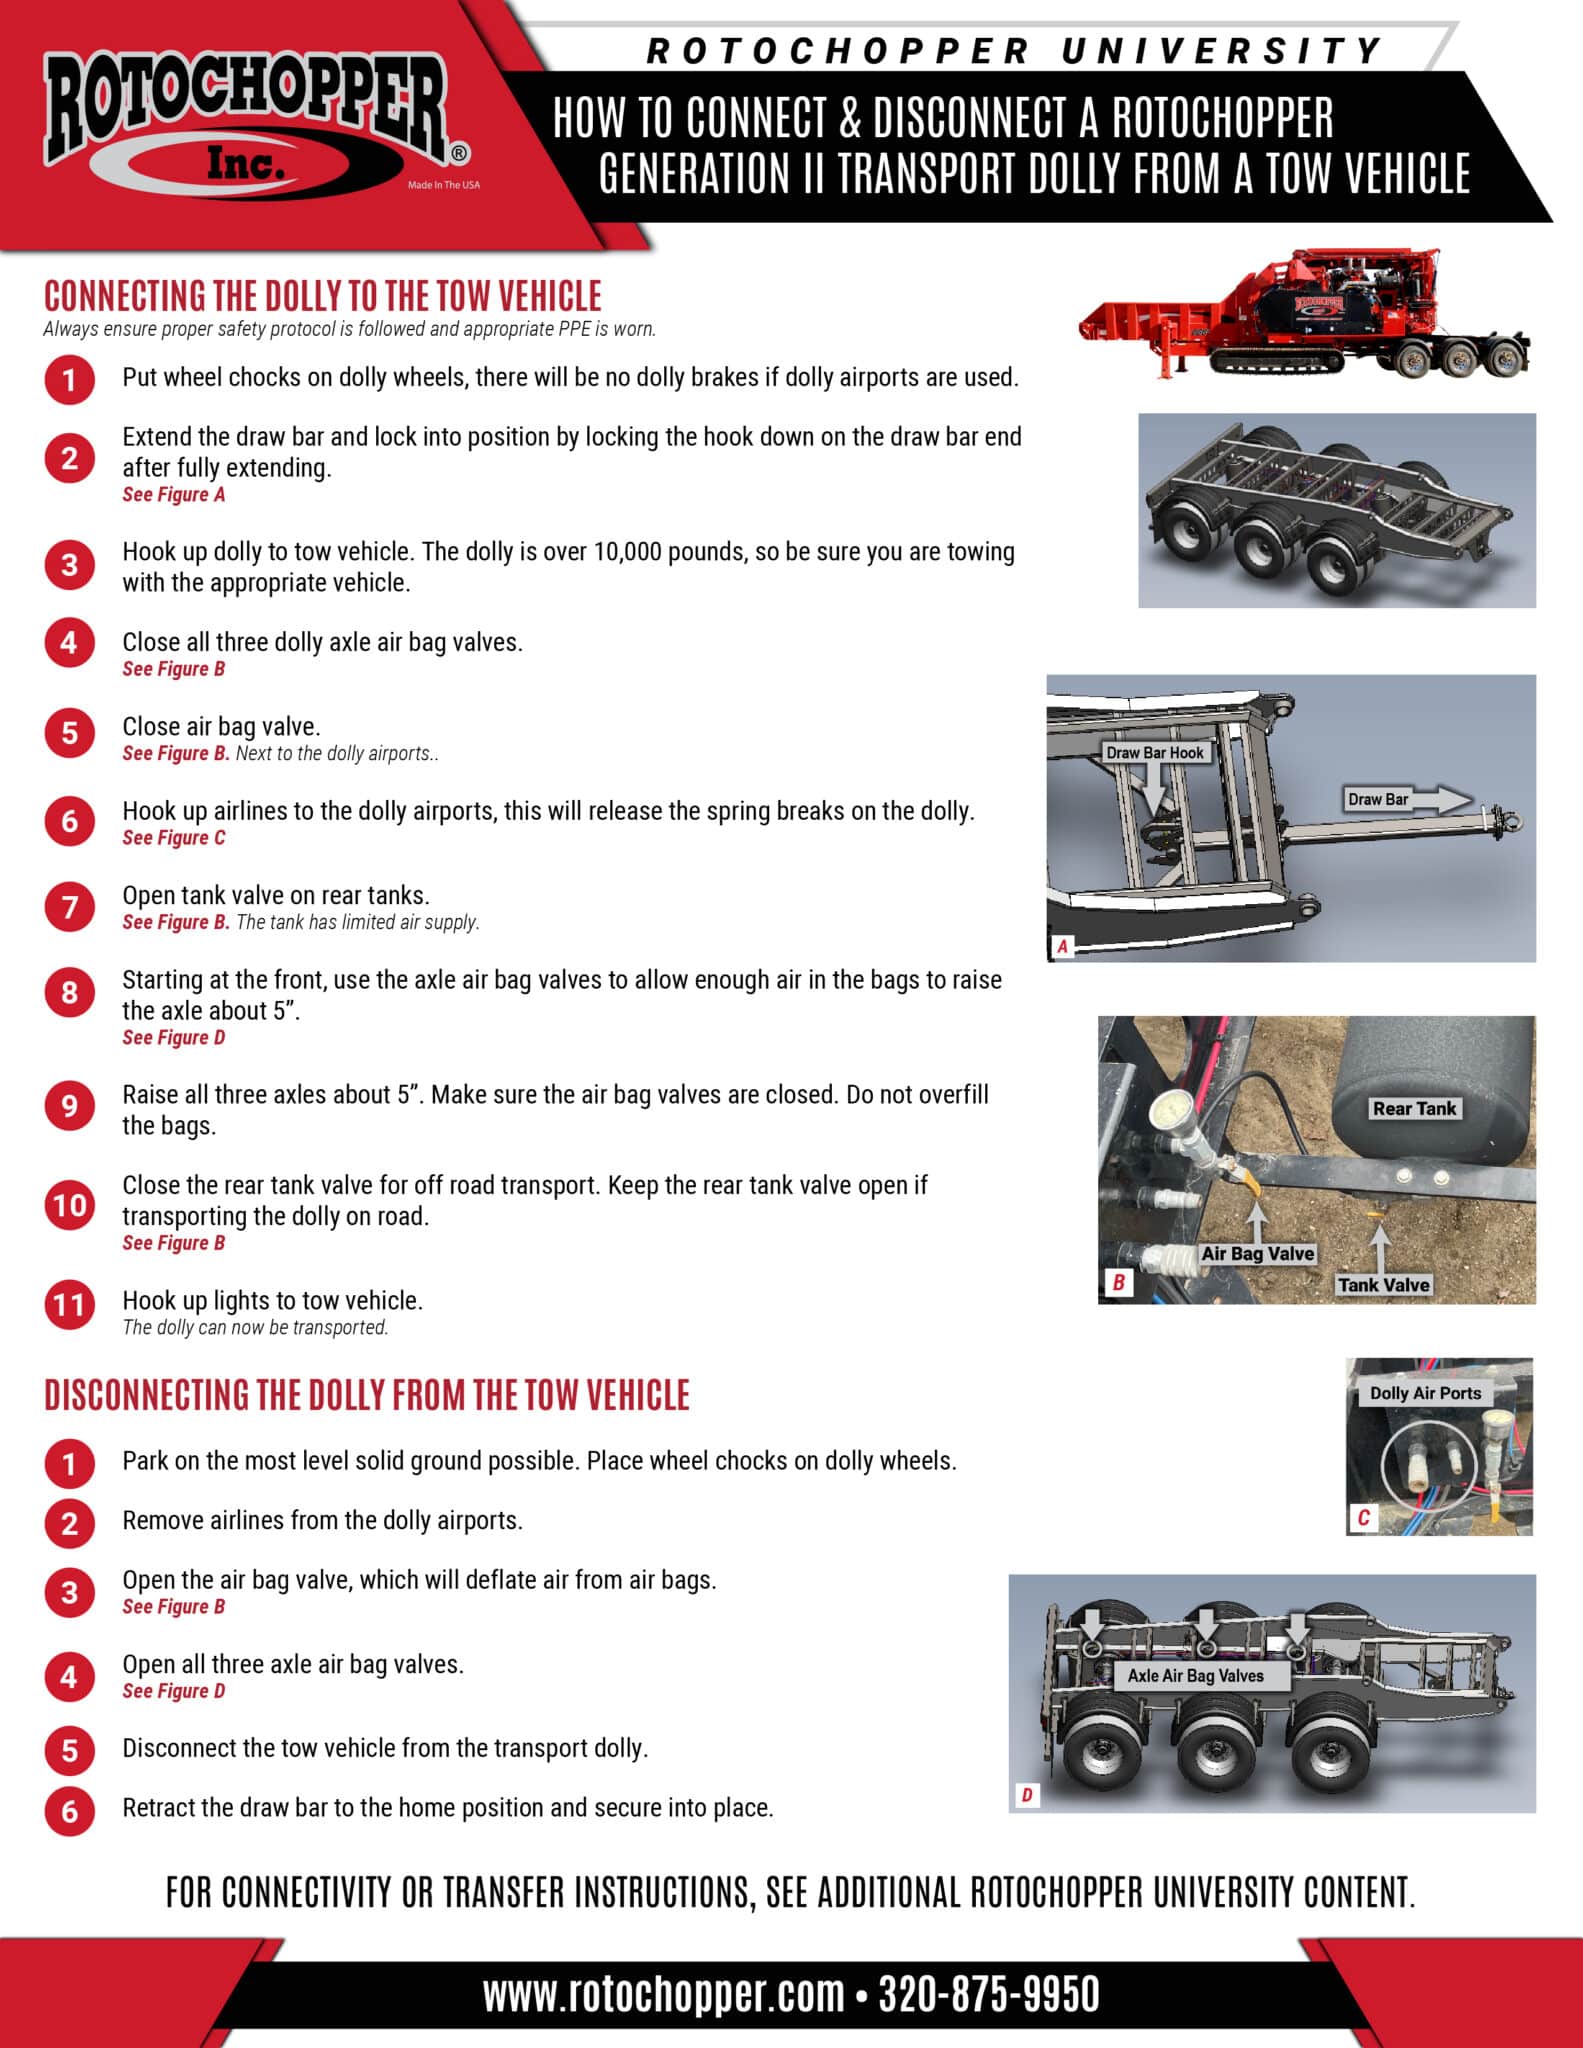 how to connect and disconnect a rotochopper generation ii transport dolly to a tow vehicle.